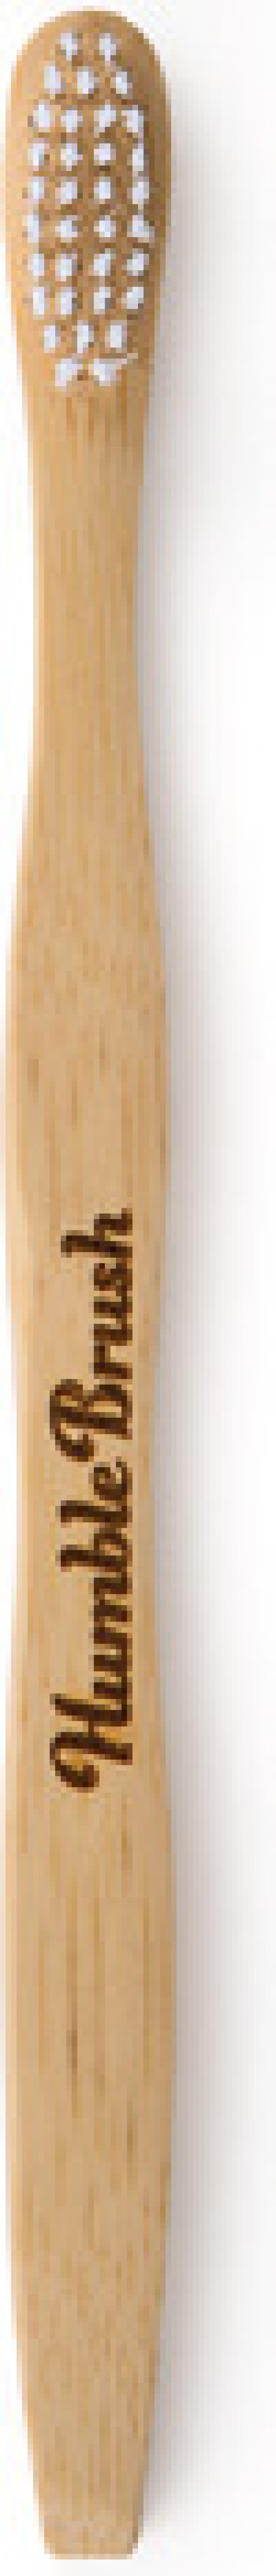 The Humble Co. Bamboo Toothbrush Adult Soft Οδοντόβουρτσα Ενηλίκων από Μπαμπού Λευκό Μαλακή 1 Τεμάχιο